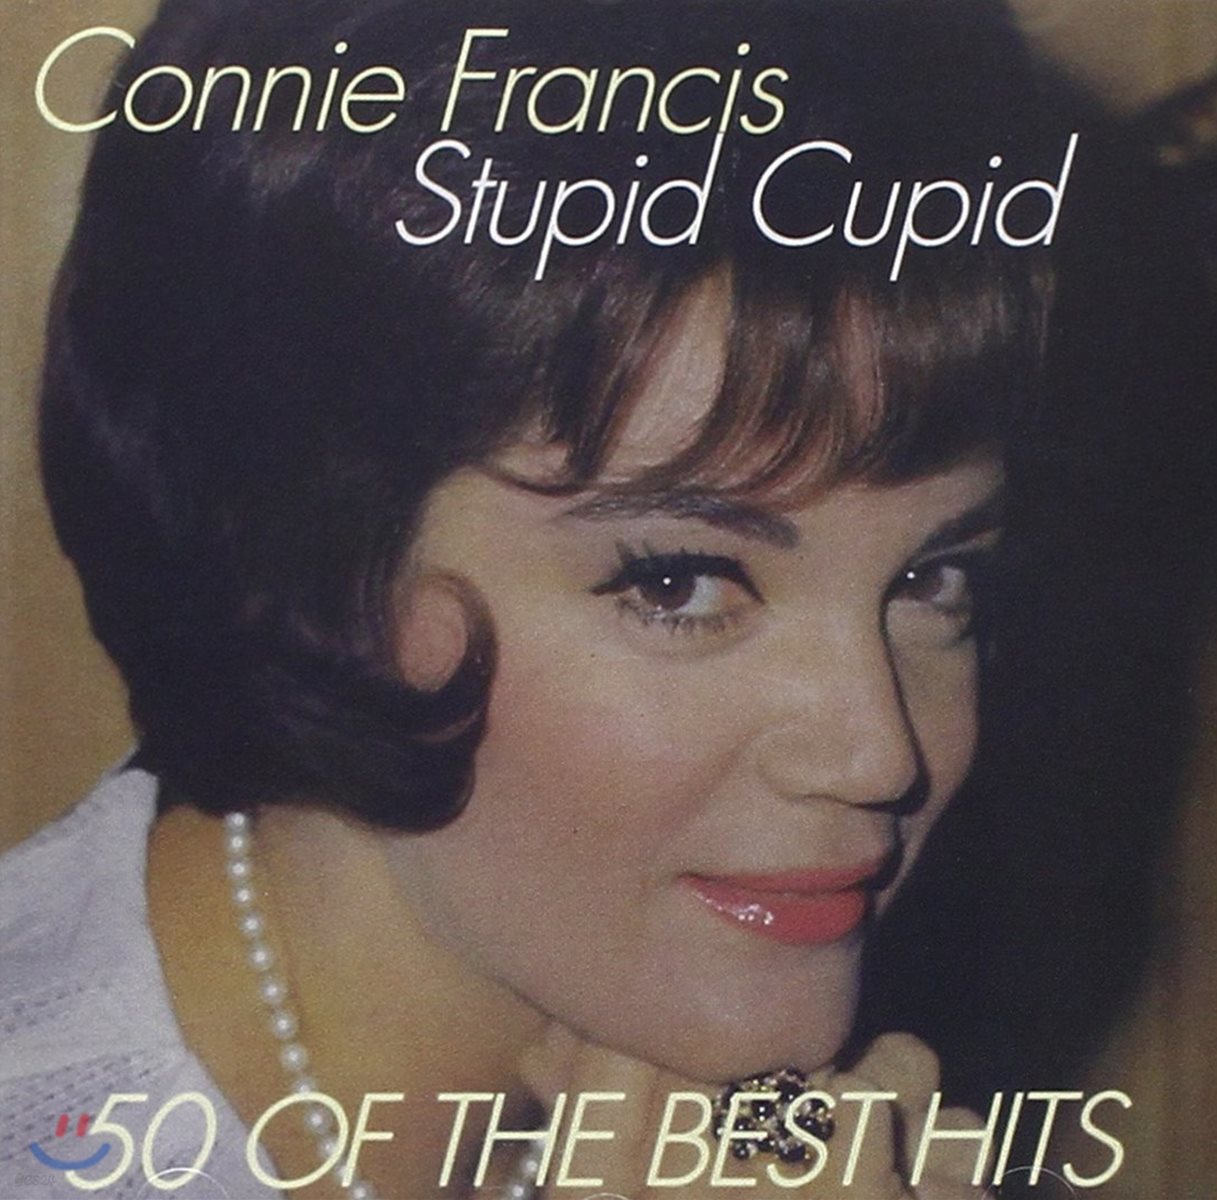 Connie Francis - Stupid Cupid: 50 Of The Best Hits 코니 프란시스 베스트 앨범 [Deluxe Edition]